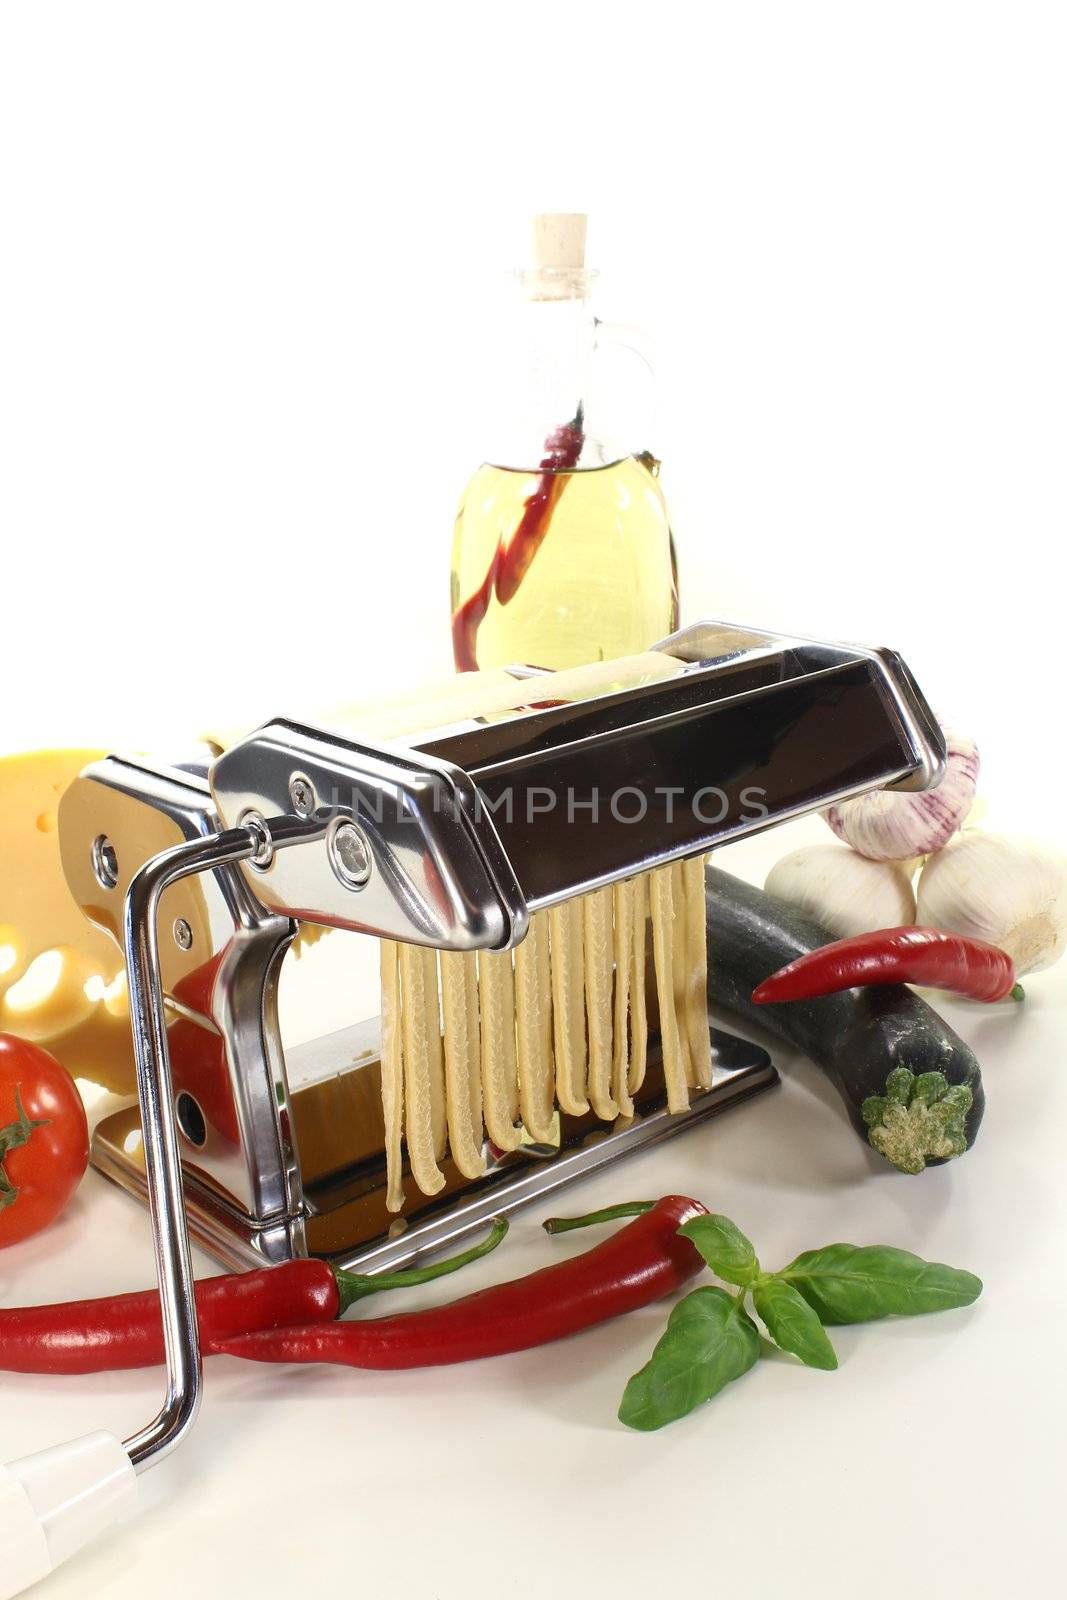 tagliatelle in a pasta machine with tomatoes, garlic and basil